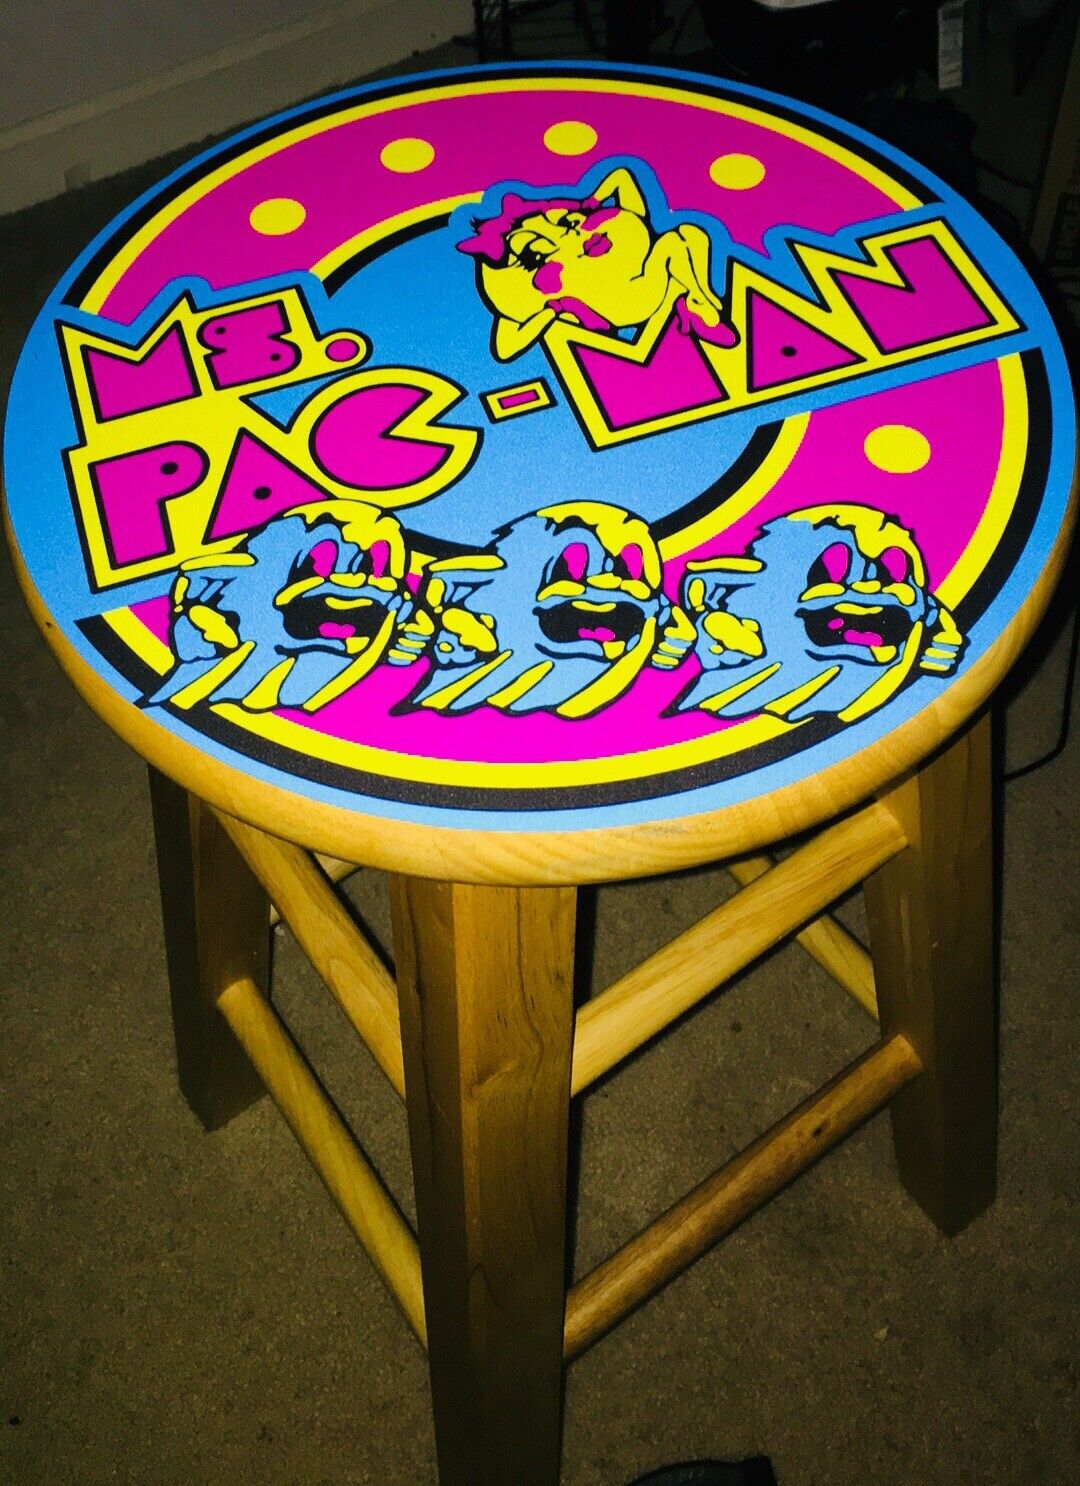 MS PAC MAN Bar Stool “Decal Only” Scratch Resistant Polycarbonate Laminate